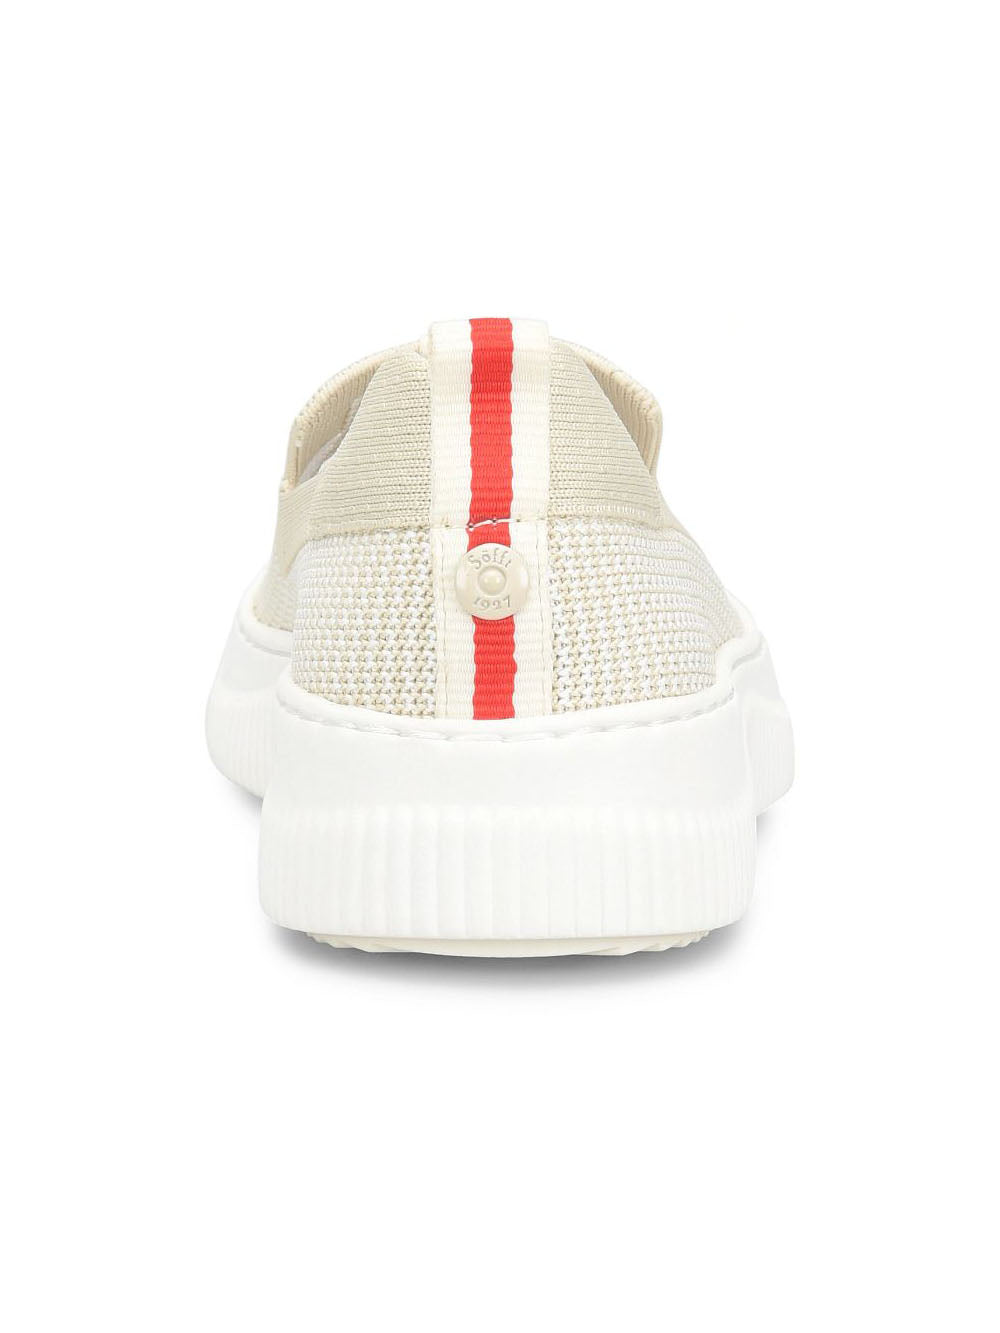 sofft shoes frayda mesh slip on sneakers in tofu beige tan with red detail